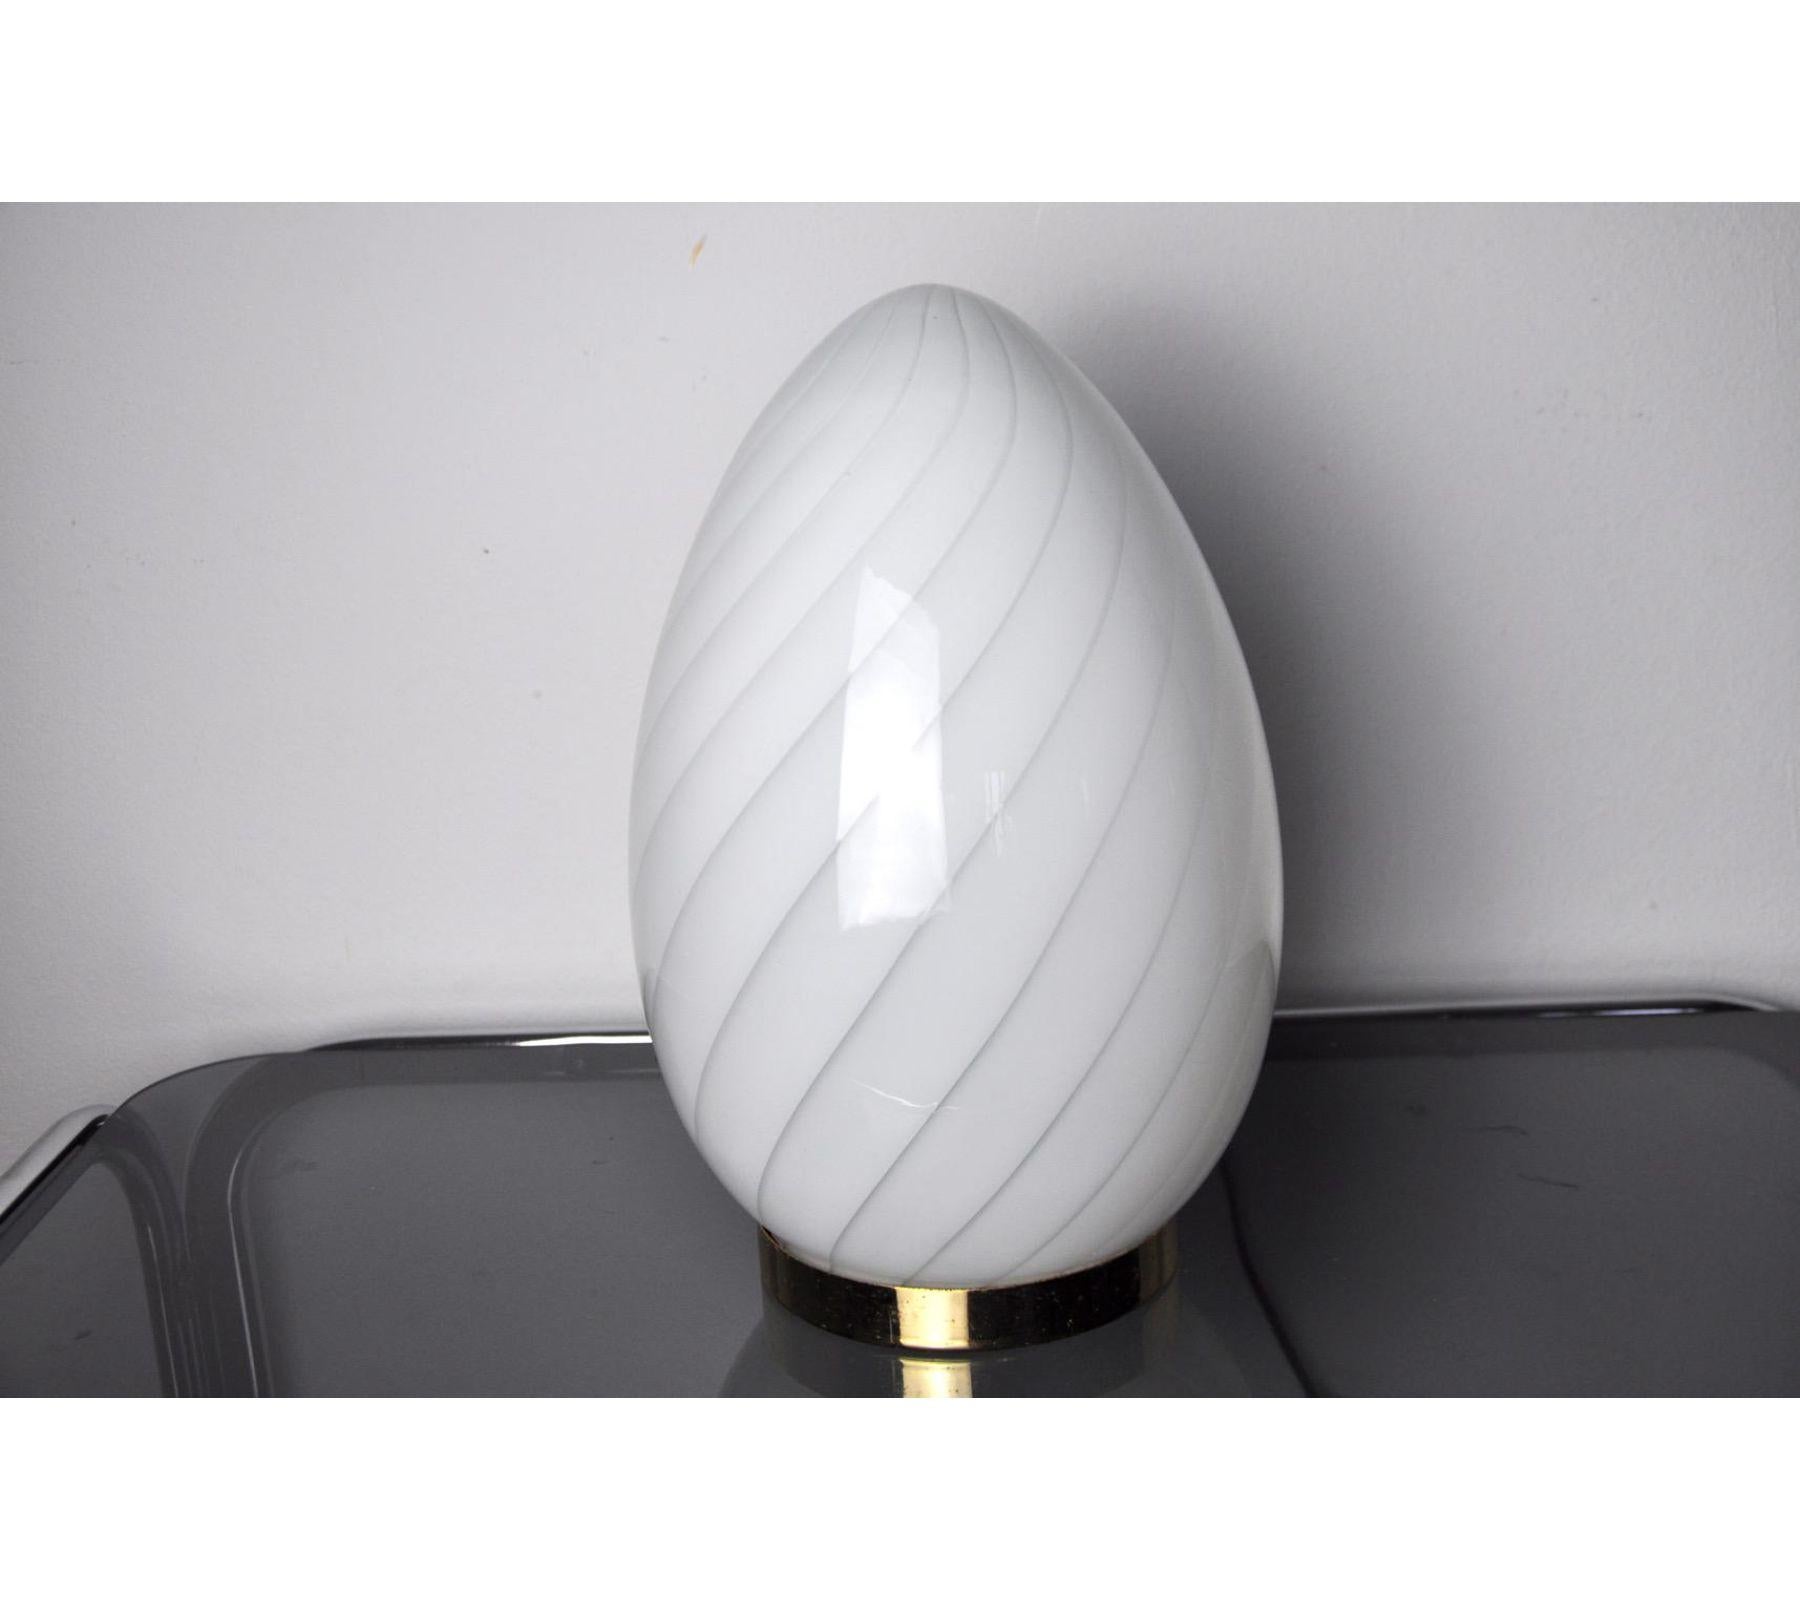 Late 20th Century 1970s Blown Glass Egg Lamp, Spain For Sale